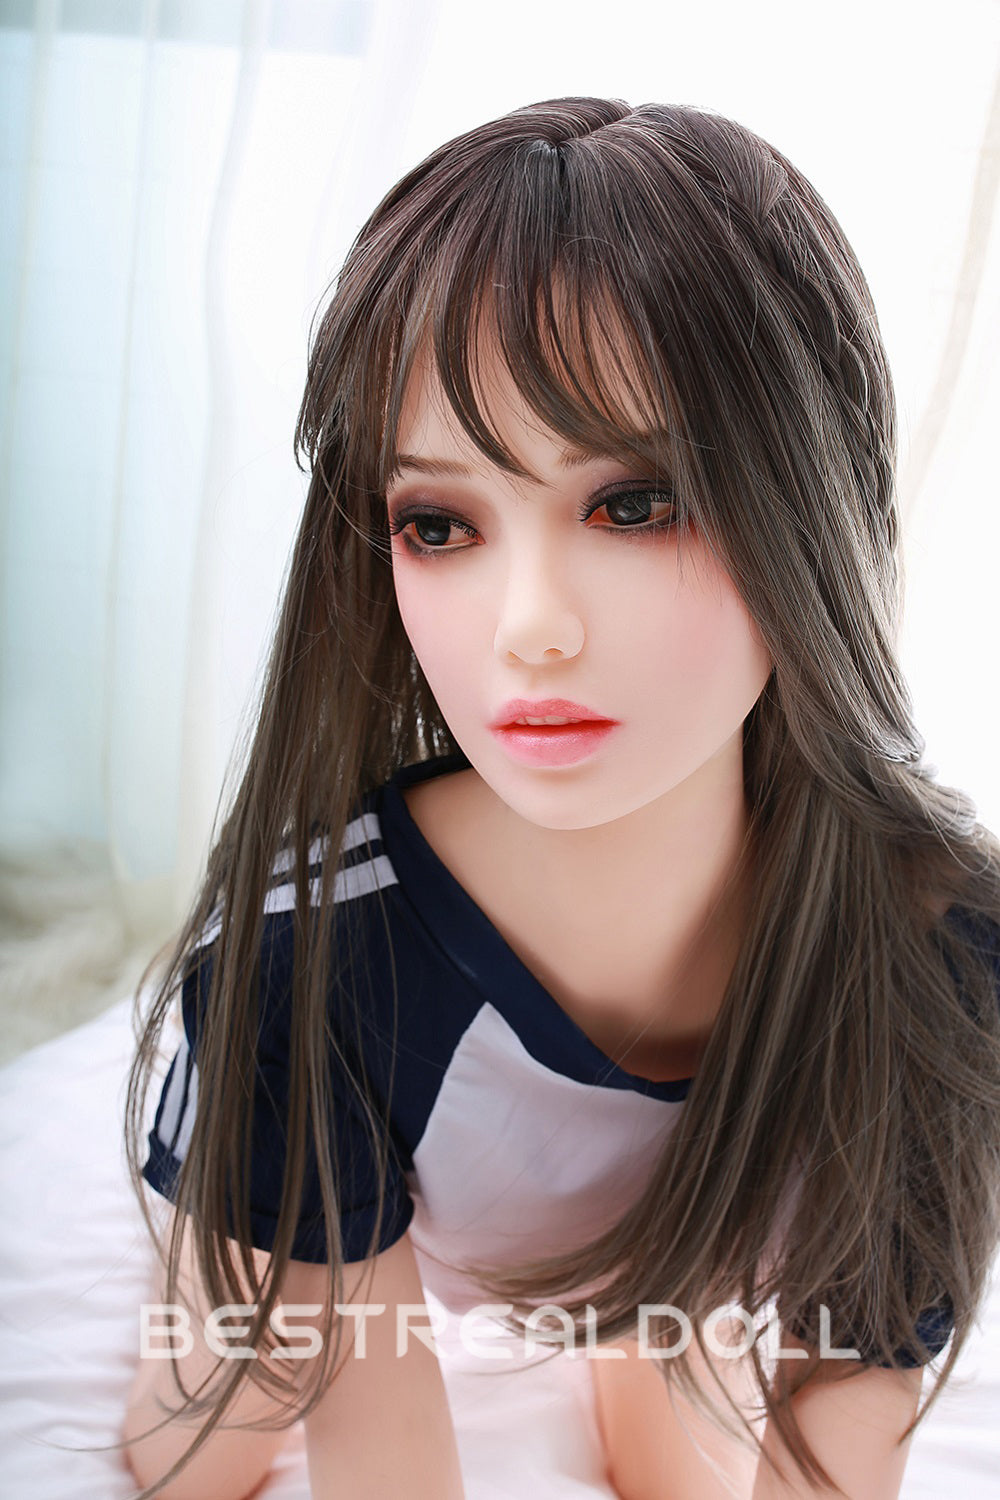 EU Stock - Carrie 158cm #144 Head Nature Skin Realistic TPE Sex Doll Adult Love Doll